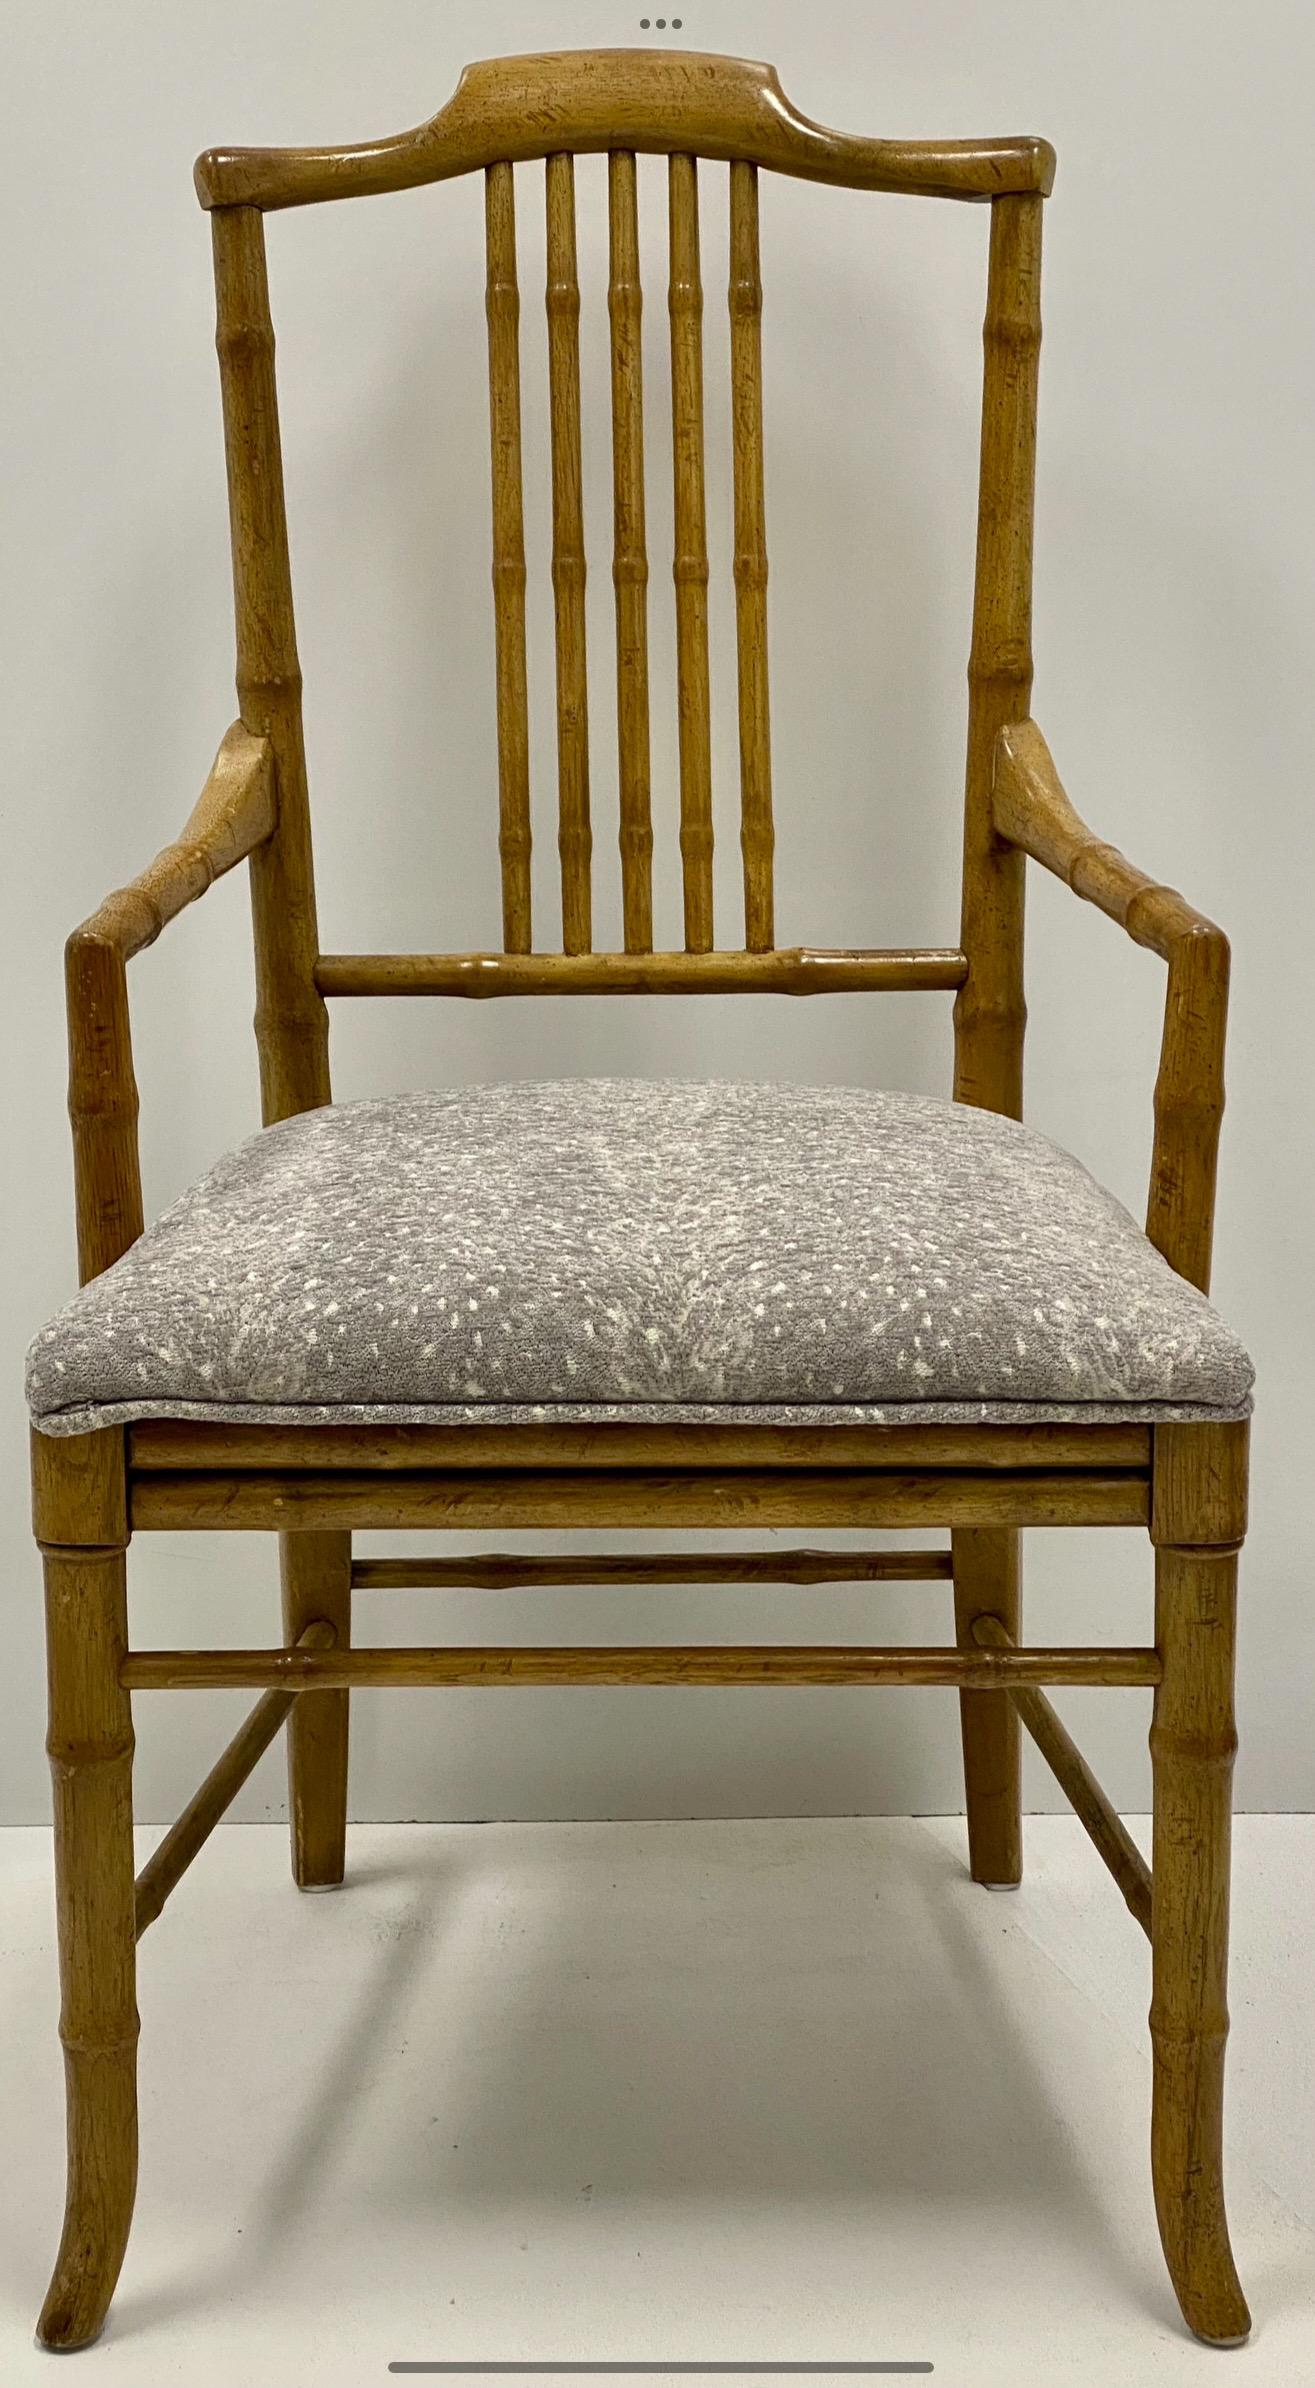 American 1970s Regency Style Faux Bamboo Bergere Armchairs In Grey Fawn Upholstery -Pair For Sale